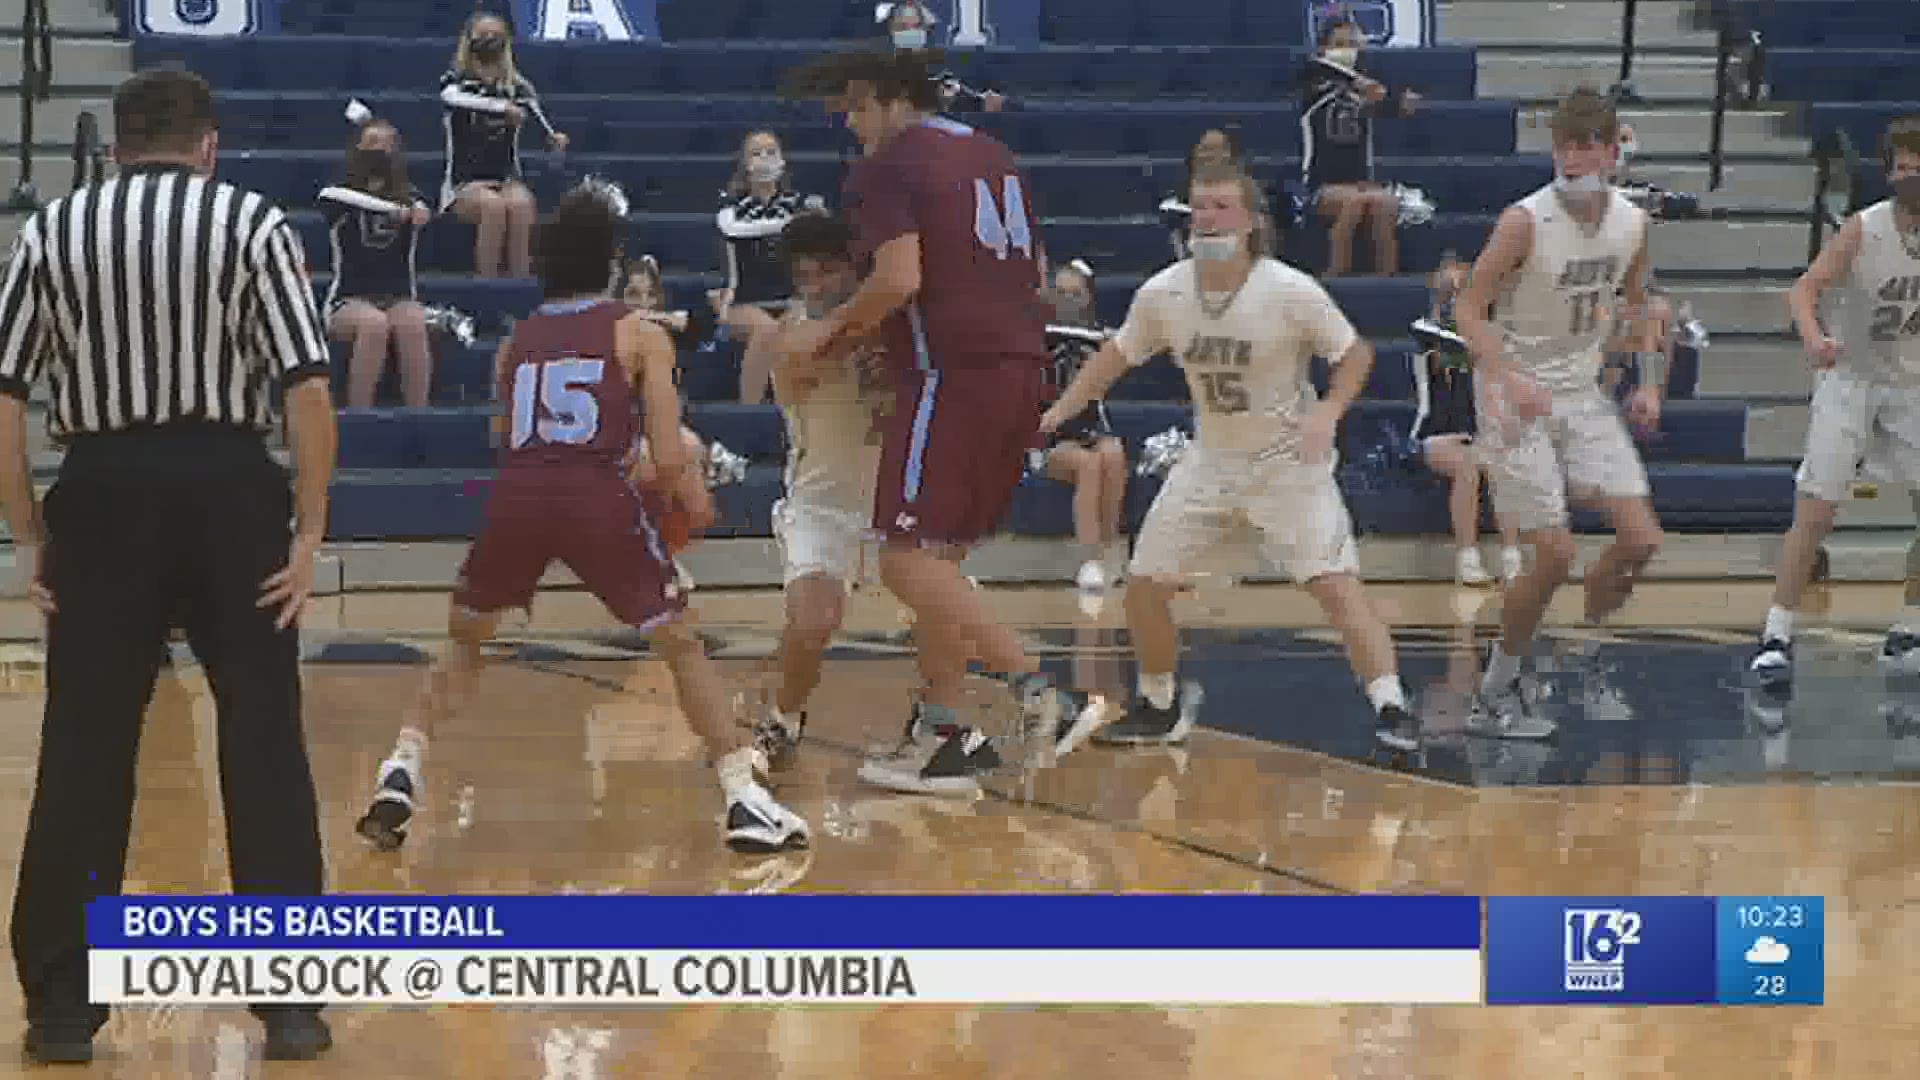 Loyalsock shoots past Central Columbia in boys HS basketball